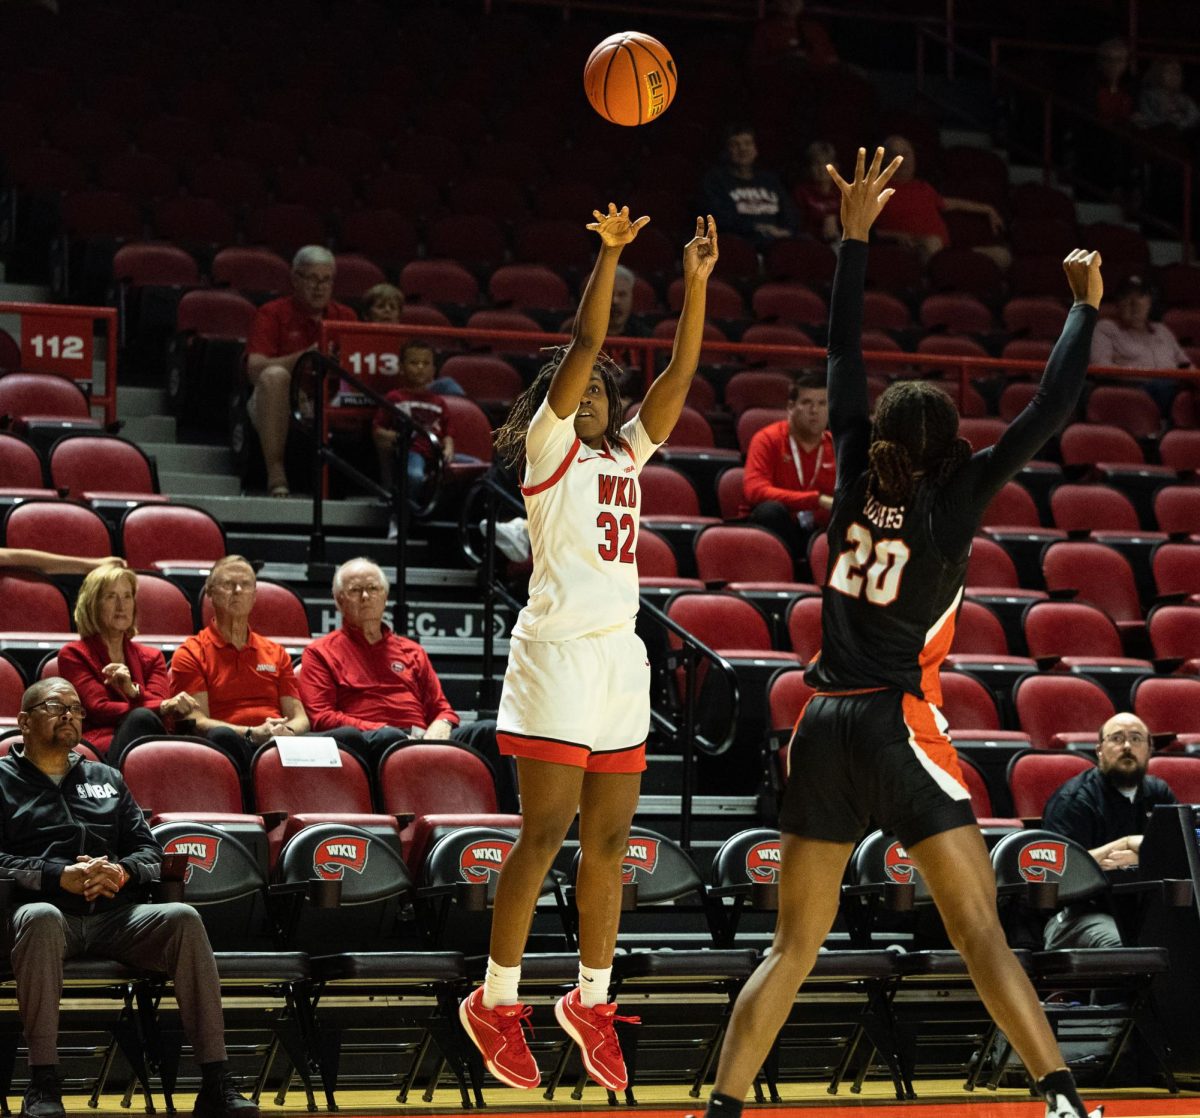 Guard Karris Allen (32) shoots a three pointer during a game against the Mercer Bears in the Diddle arena on Monday, Nov. 6, 2023.